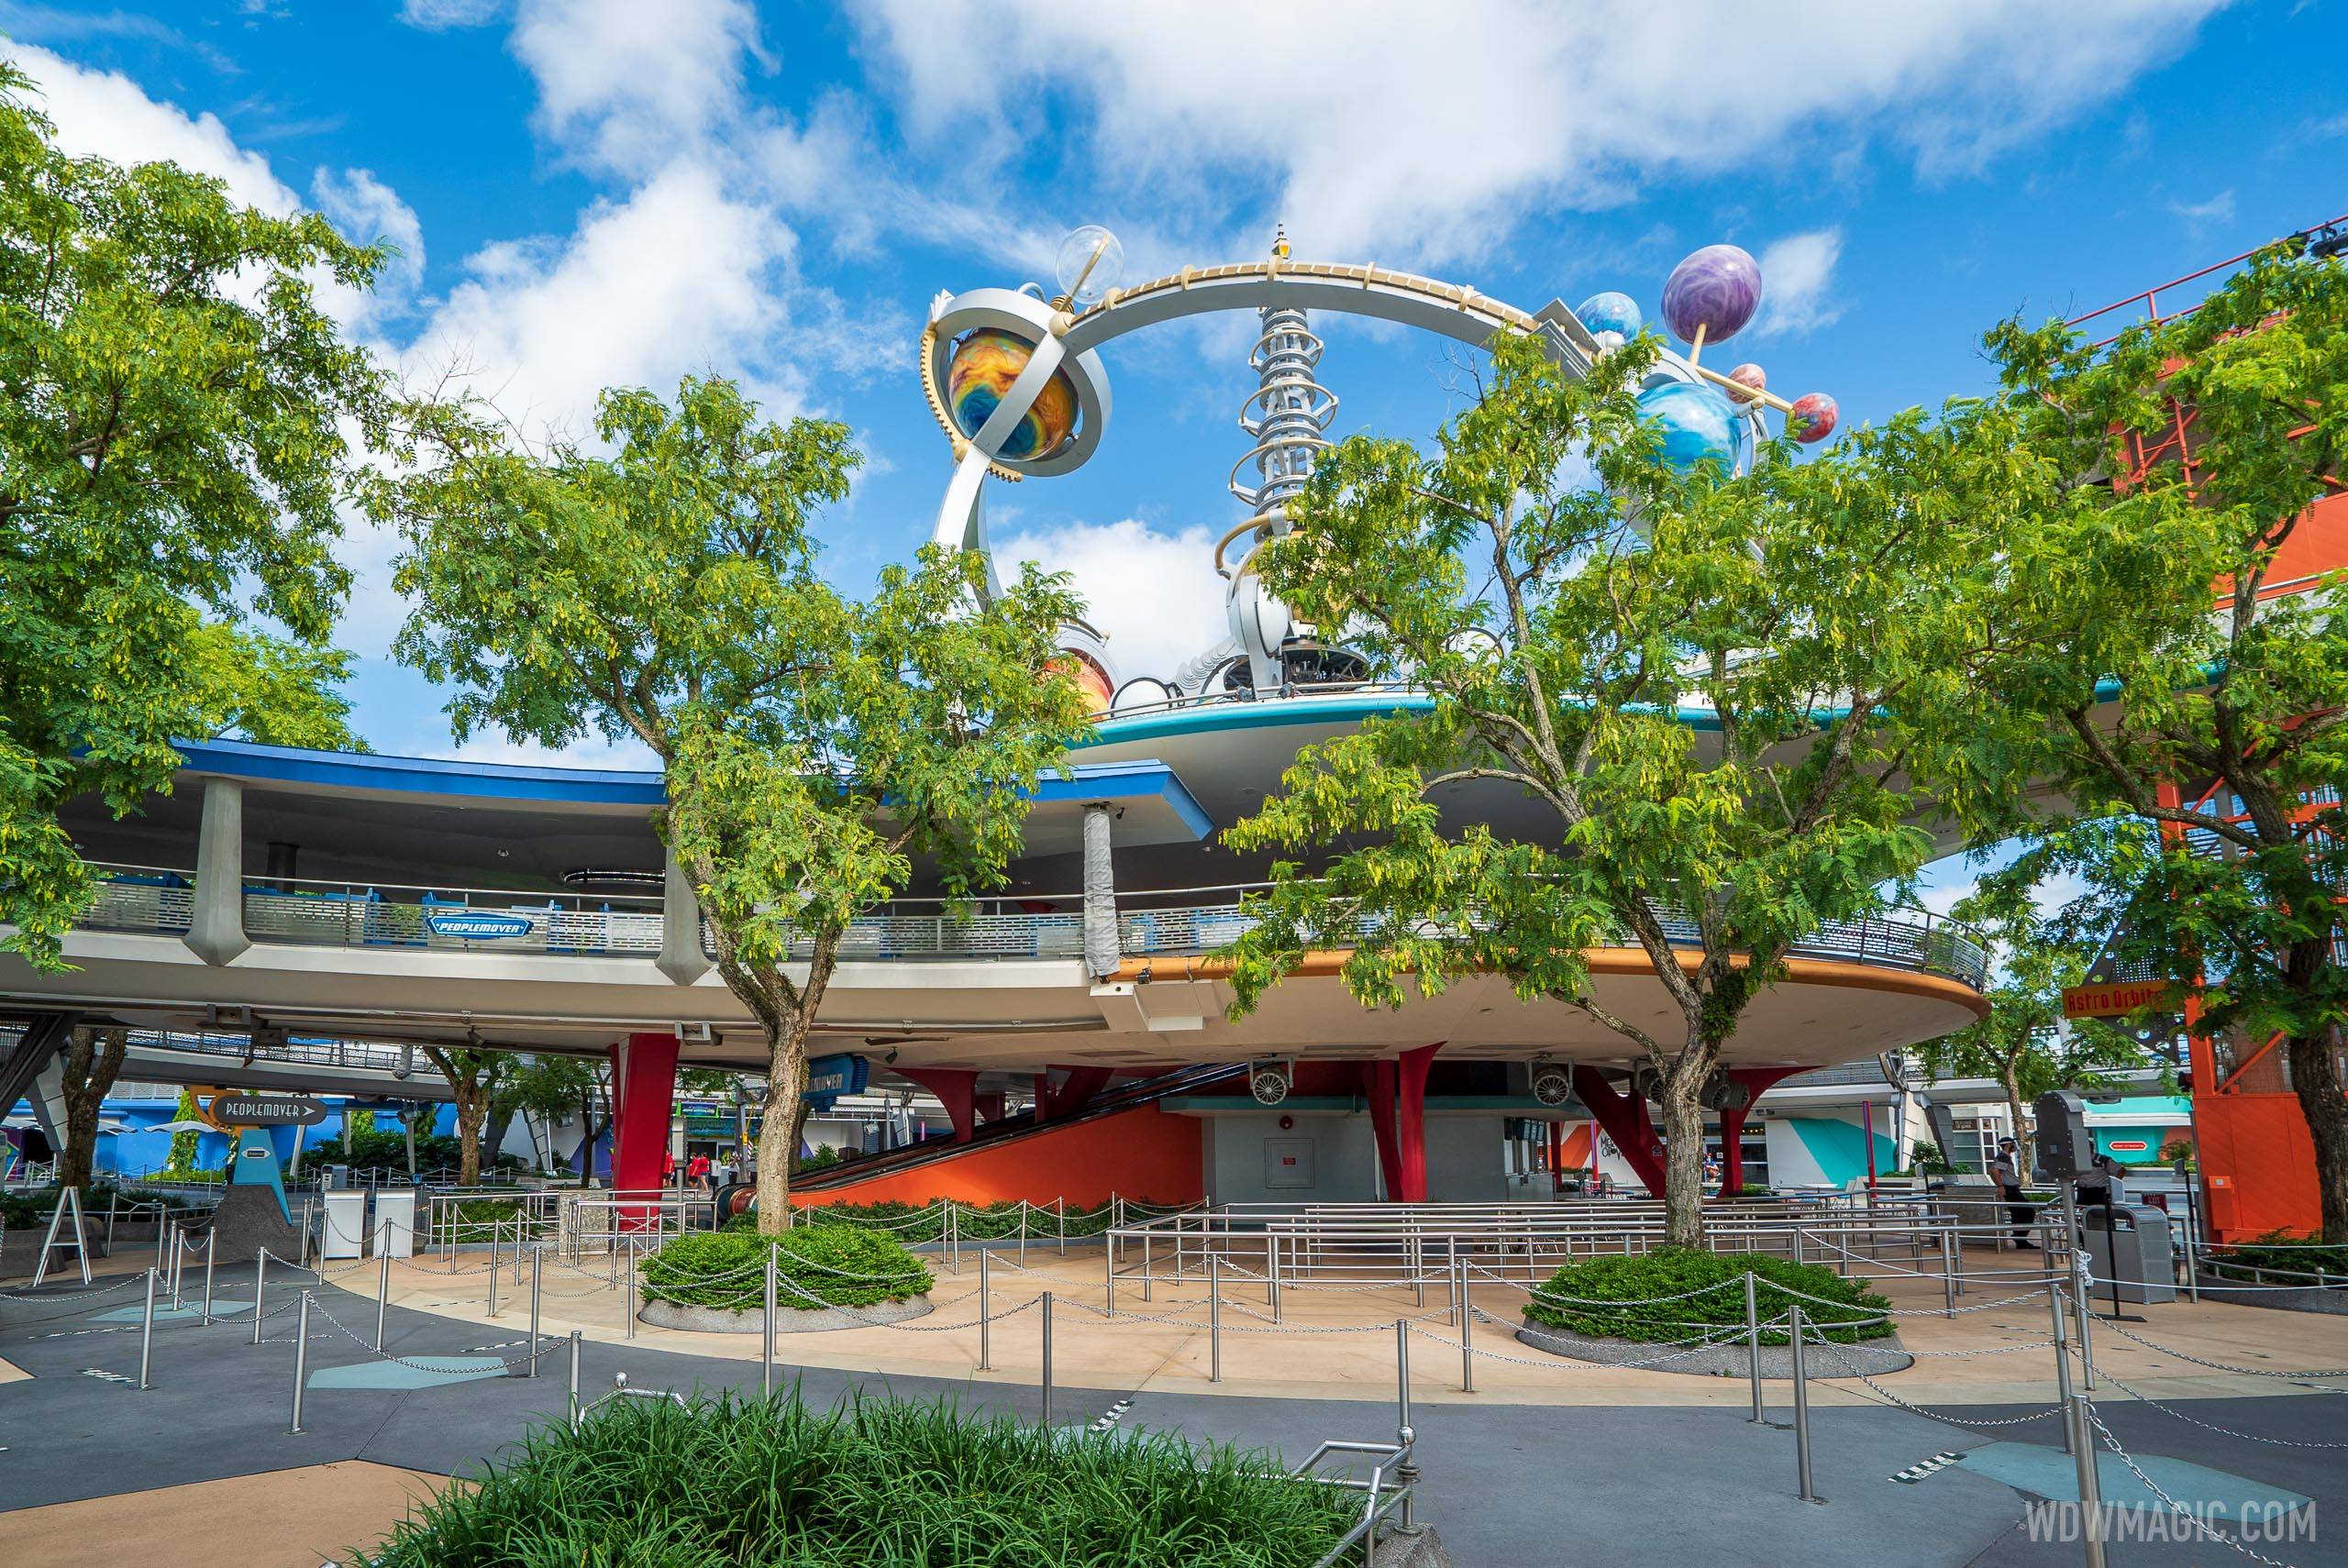 The PeopleMover had been closed for more than a year